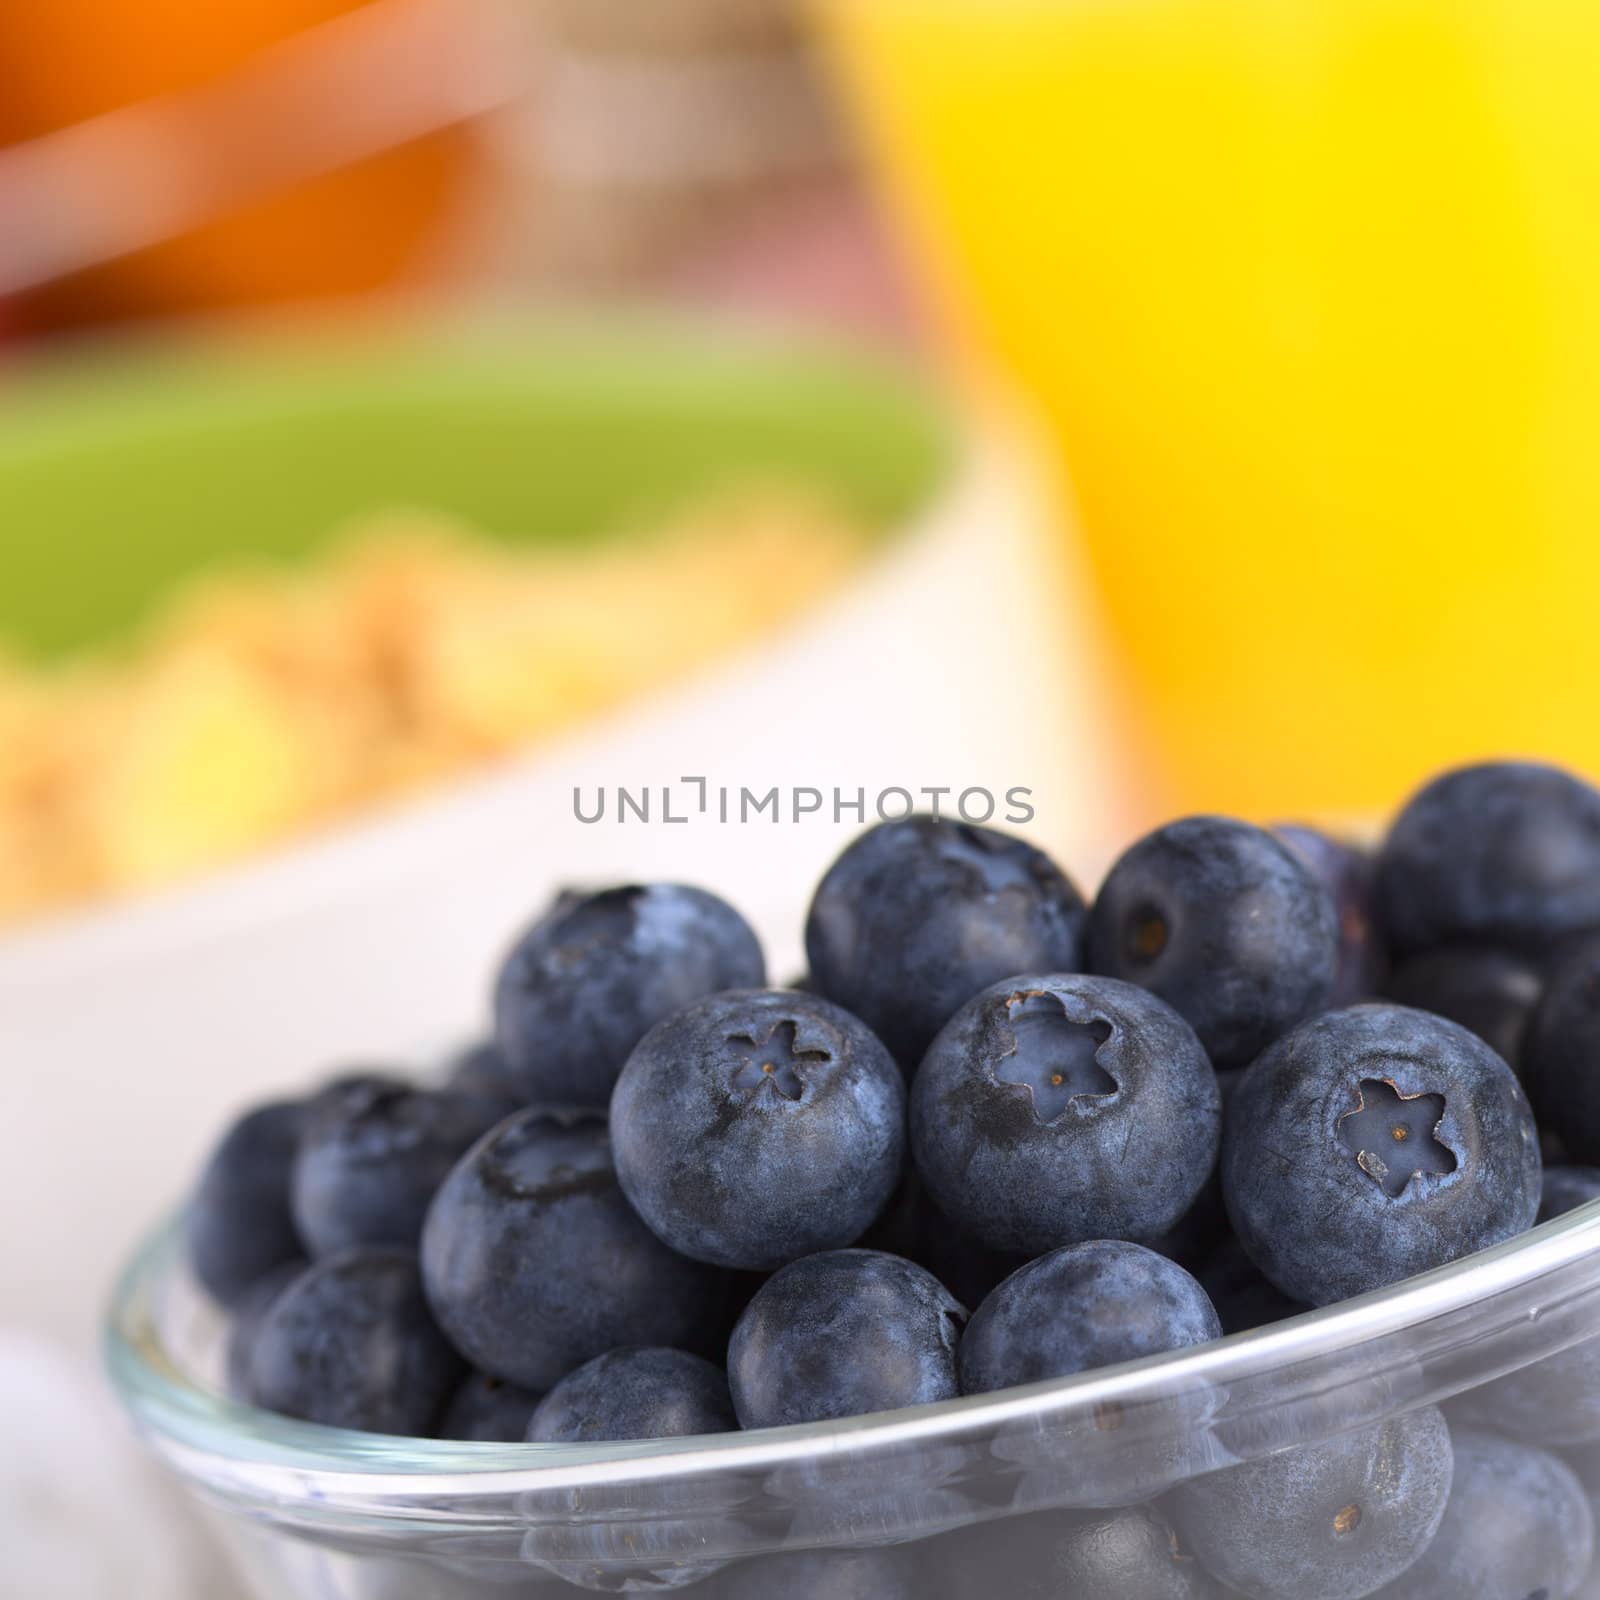 Fresh blueberries in glass bowl with a bowl of cereal and orange juice in the back (Selective Focus, Focus on the middle row of blueberries)